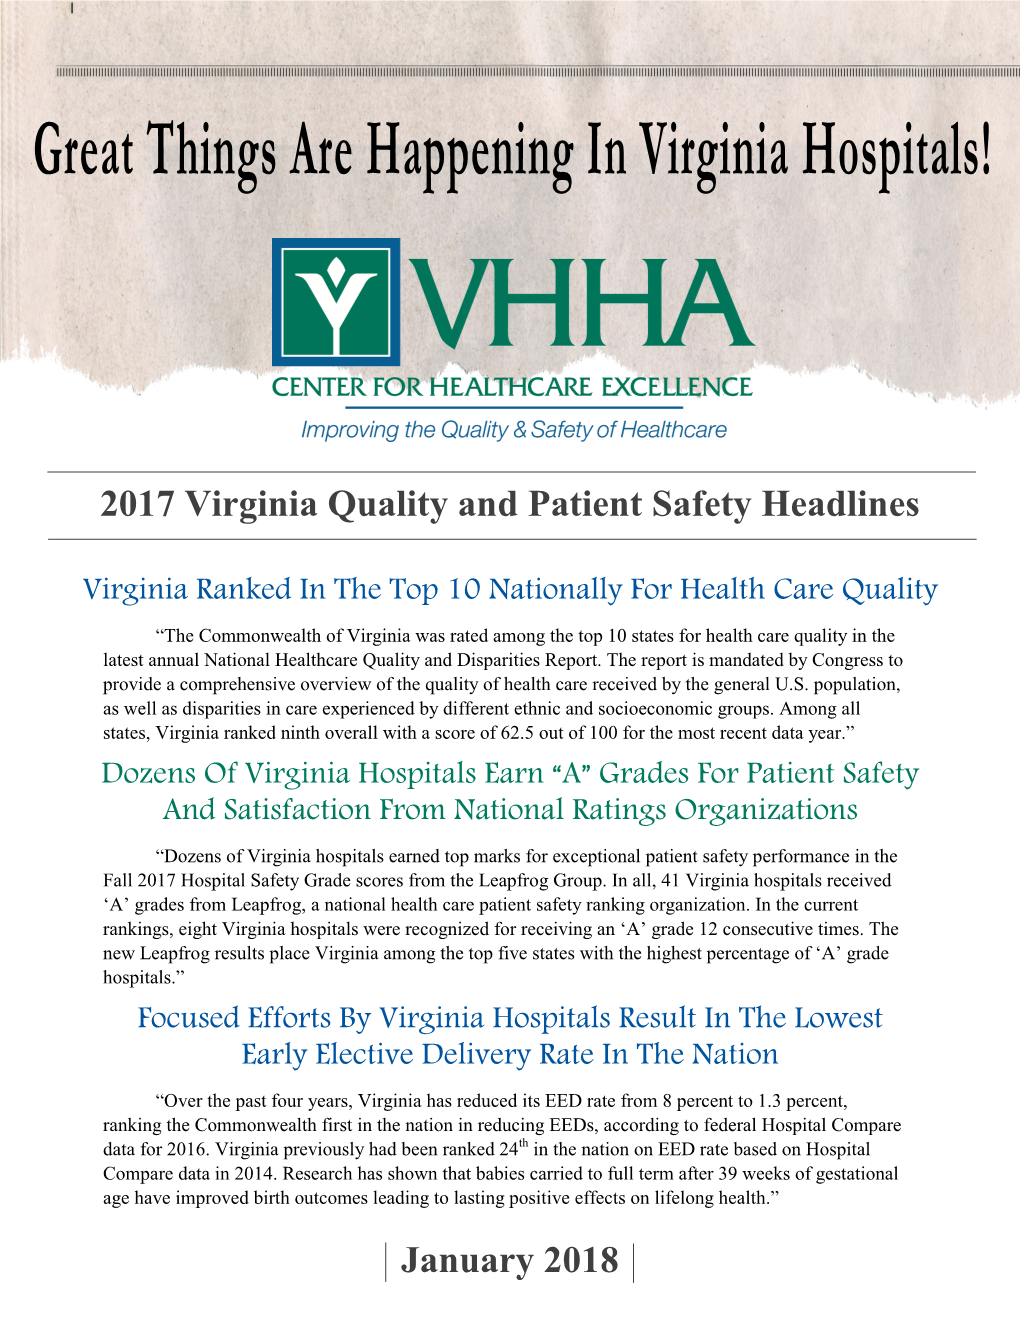 Great Things Are Happening in Virginia Hospitals!